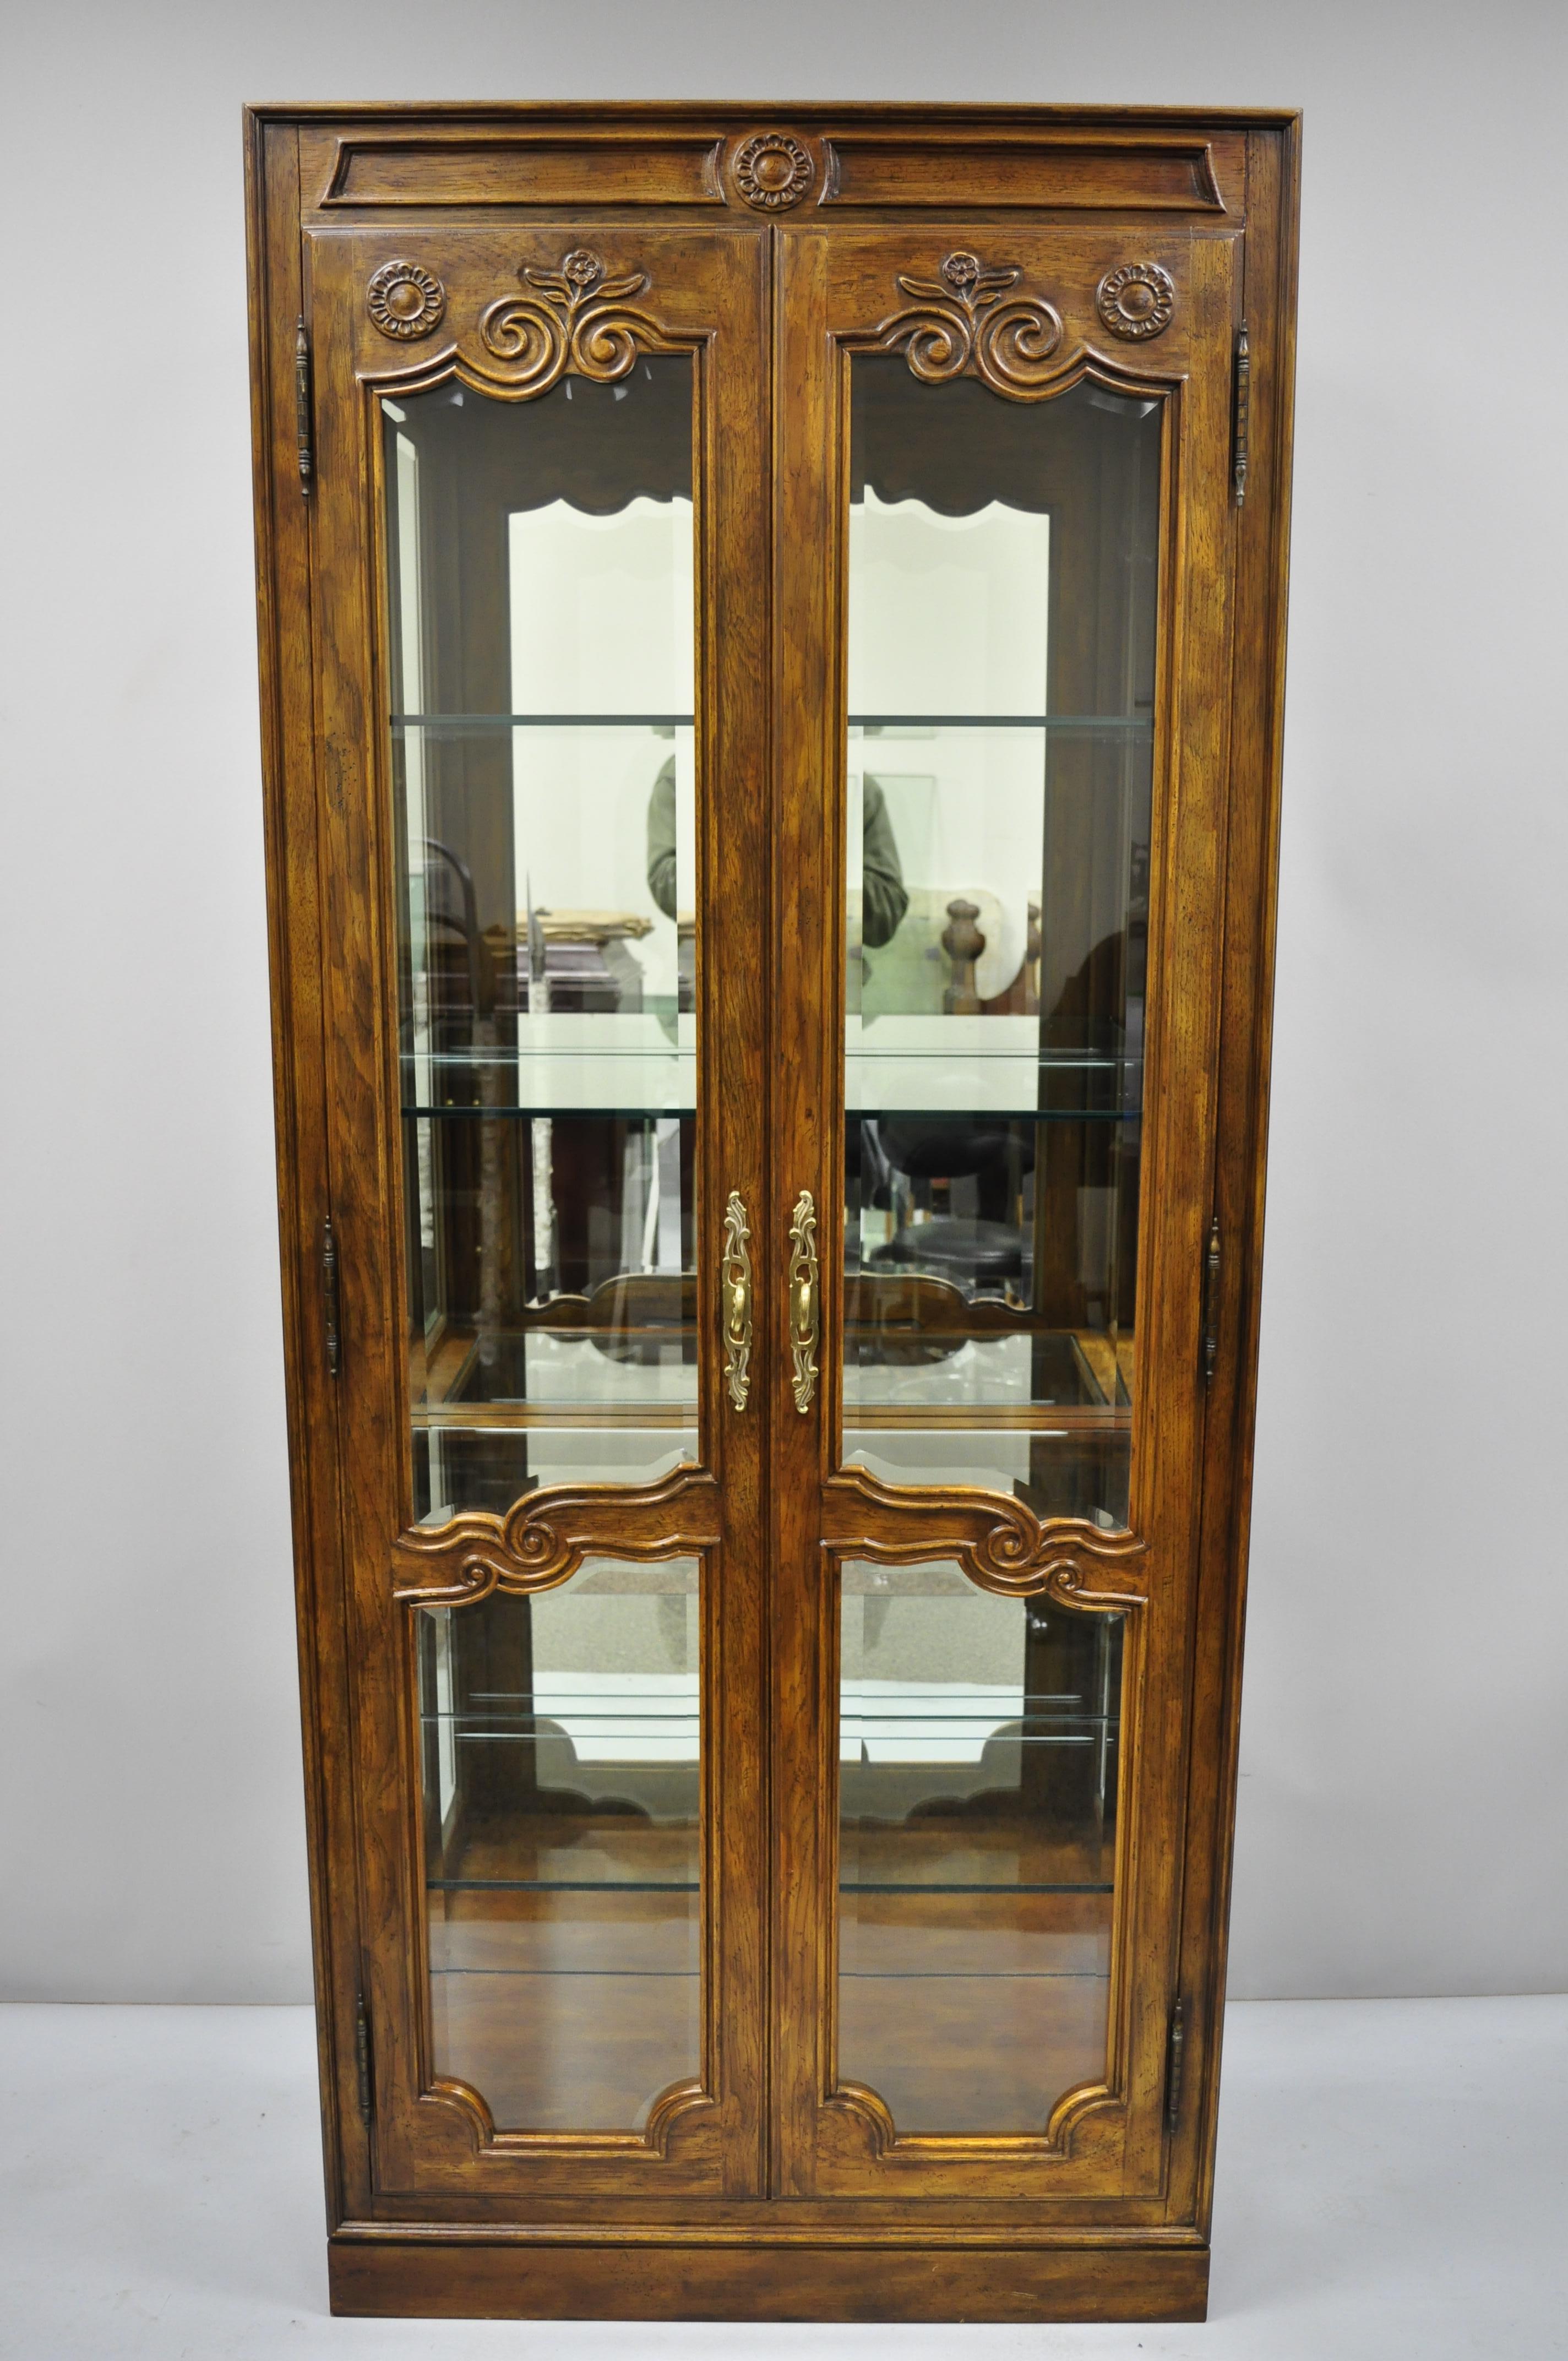 Pair of Drexel heritage old continent lighted curio China cabinets. Listing includes (2 curios) solid wood construction, nicely carved details, lighted interior with dimmer, 2 swing doors, beveled glass, plate groves, 4 adjustable glass shelves,